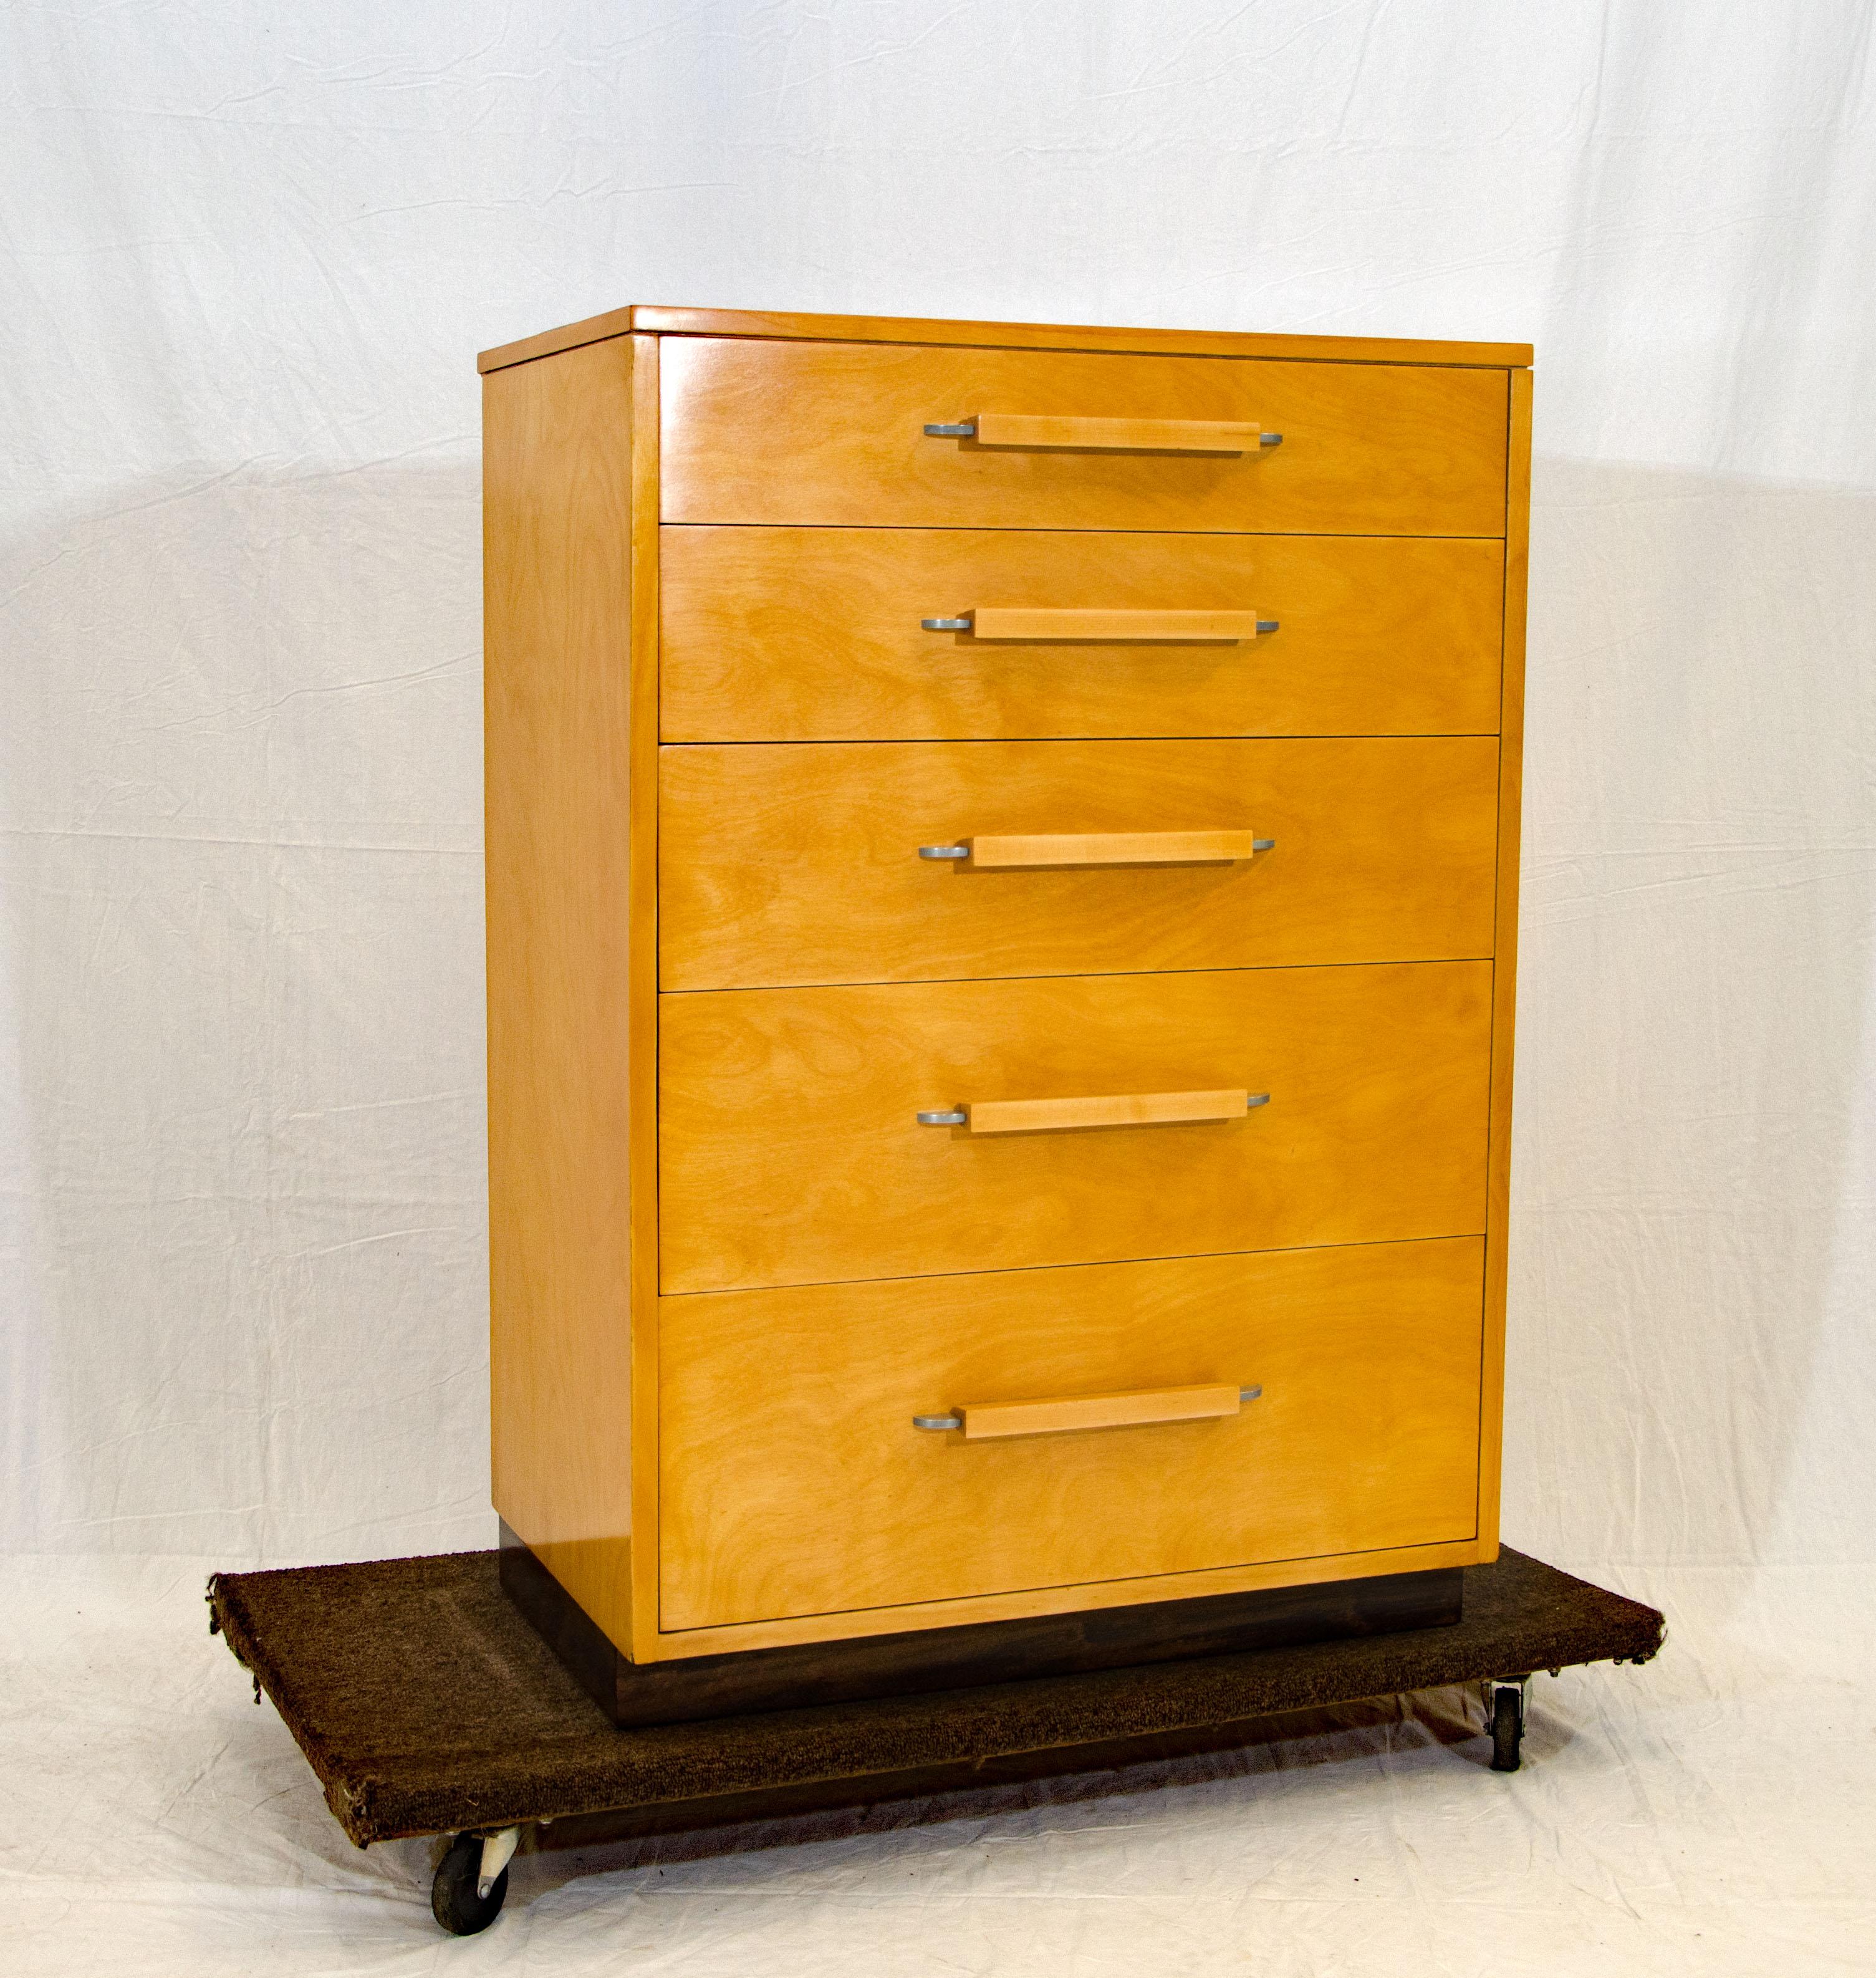 This highboy dresser design is from the FHA (Flexible Home Arrangement) collection by Eliel Saarinen, in collaboration with Eva-Lisa (Pipsan) Saarinen Swanson and J. Robert F. Swanson. The extended back edge of the top allows for snug placement